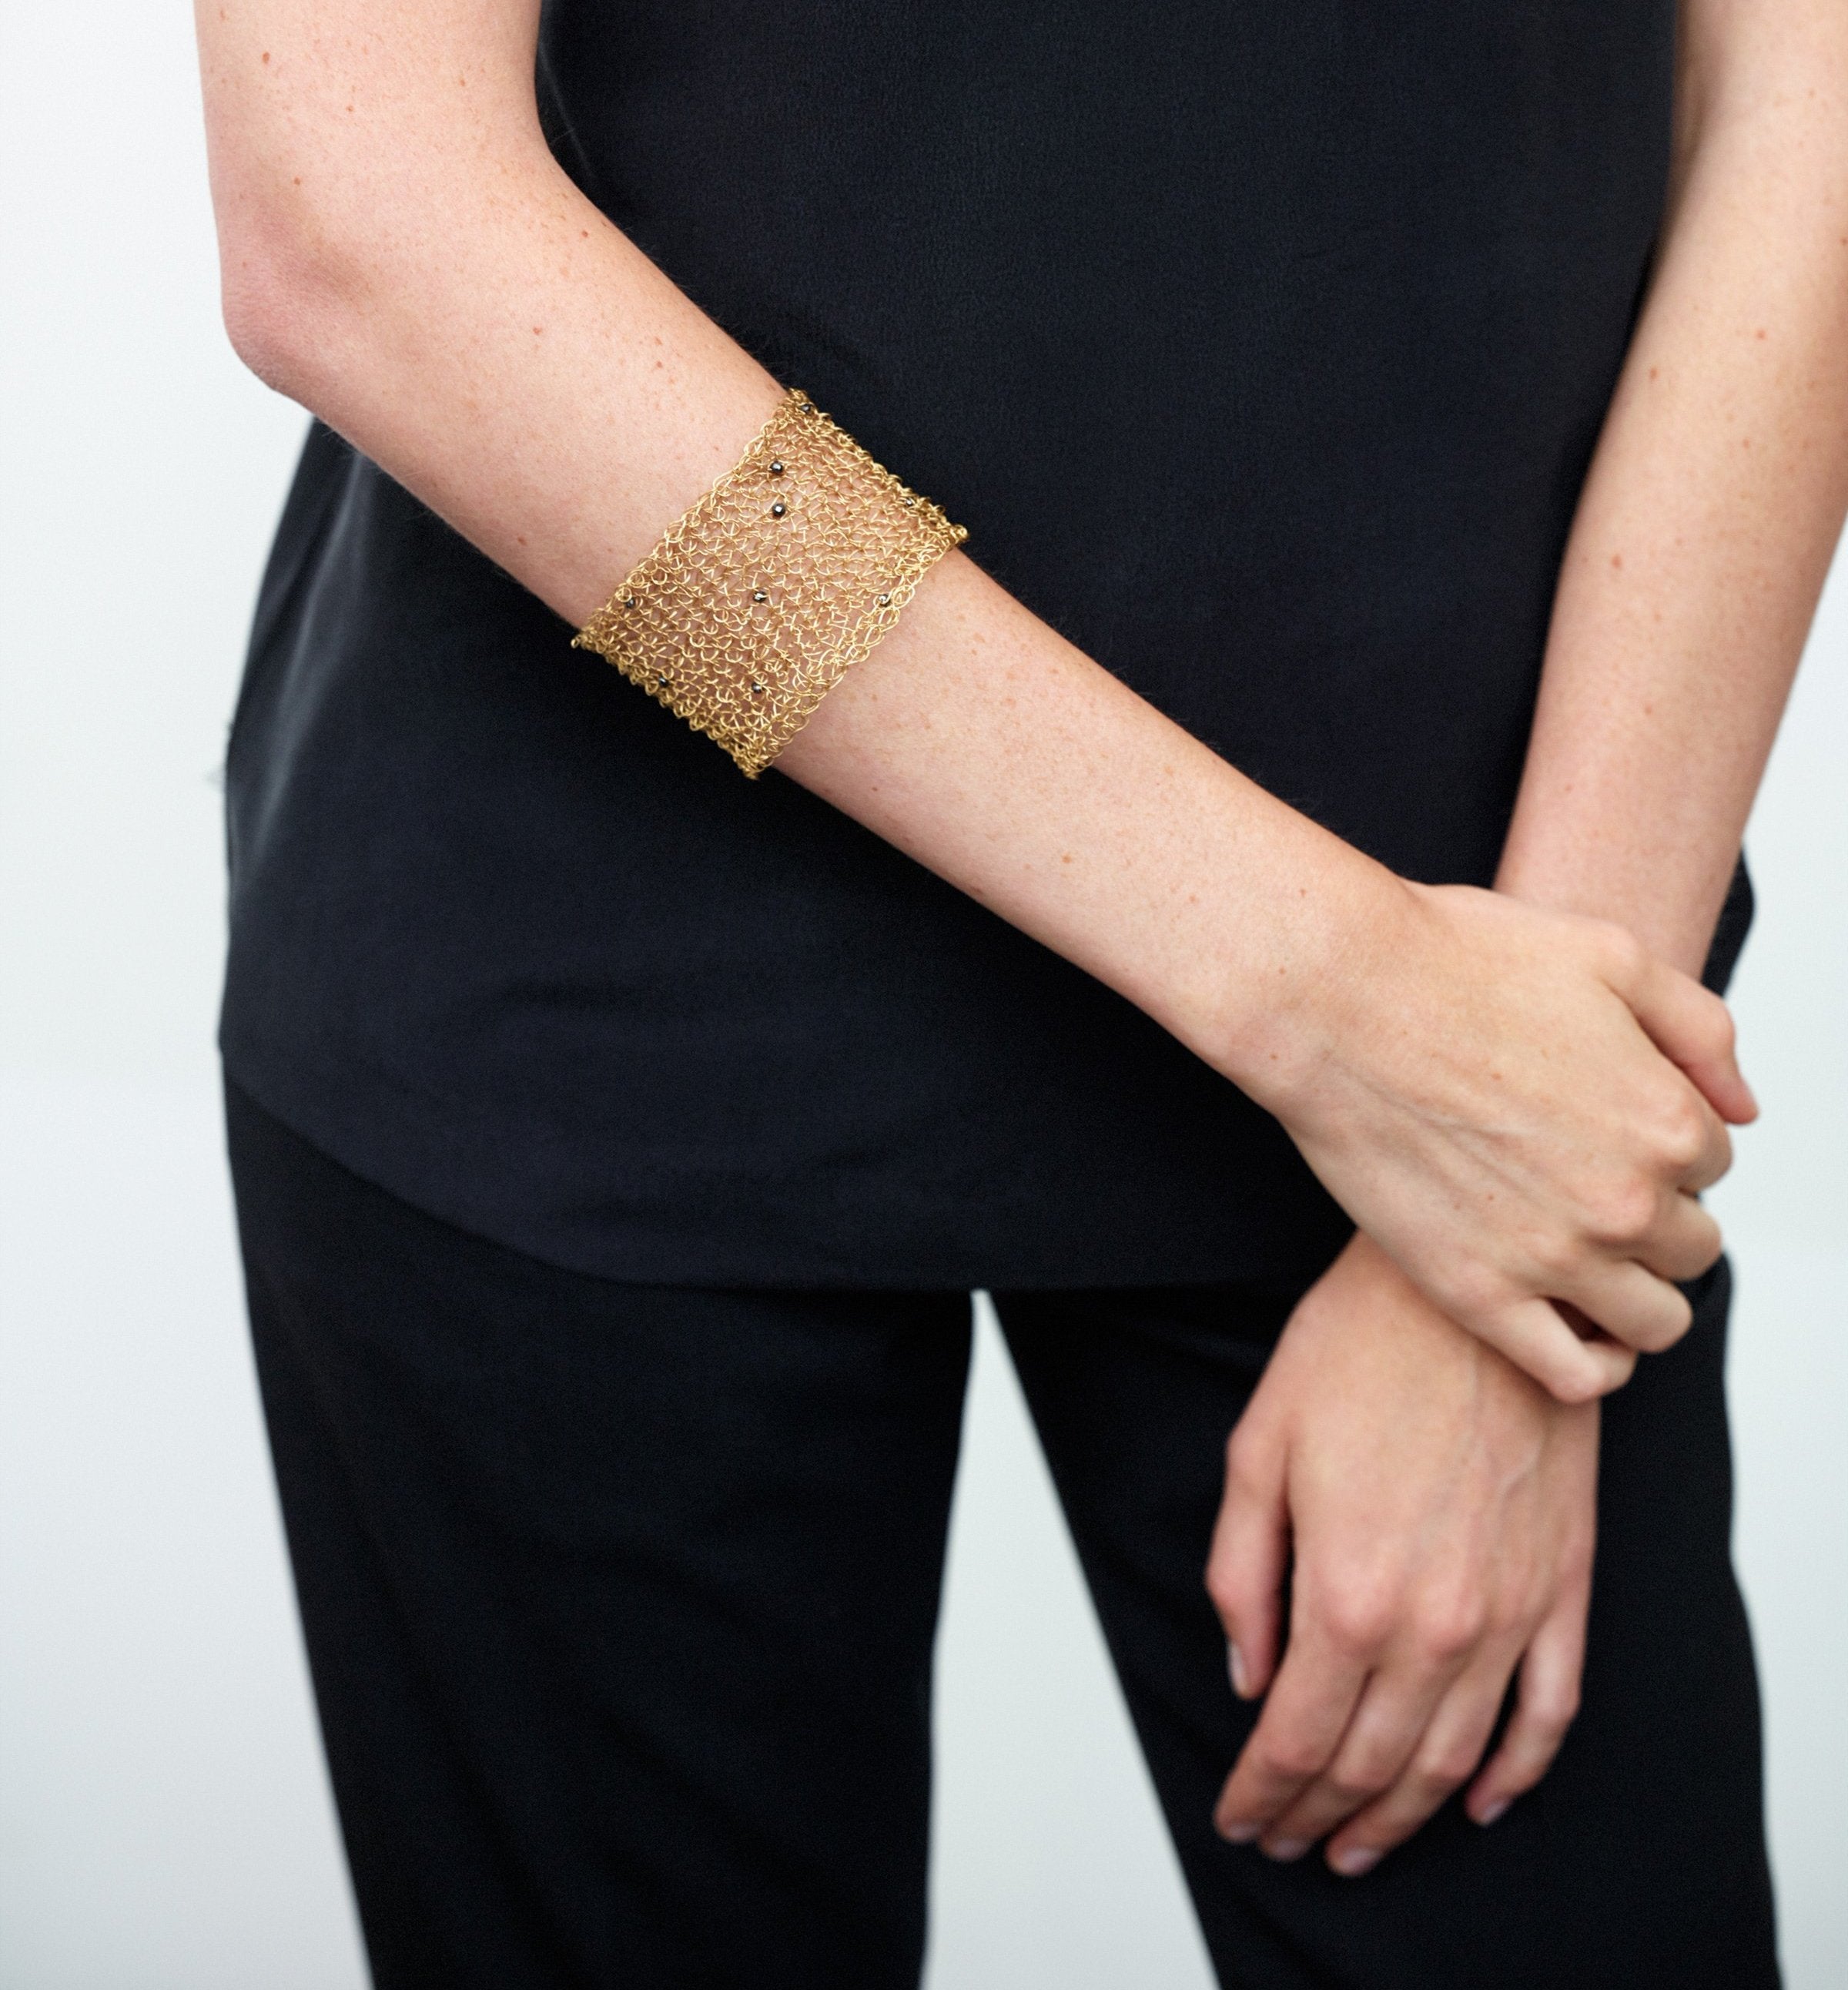 18KT yellow gold cuff bracelet with black spinels worn by female arm - Mesh